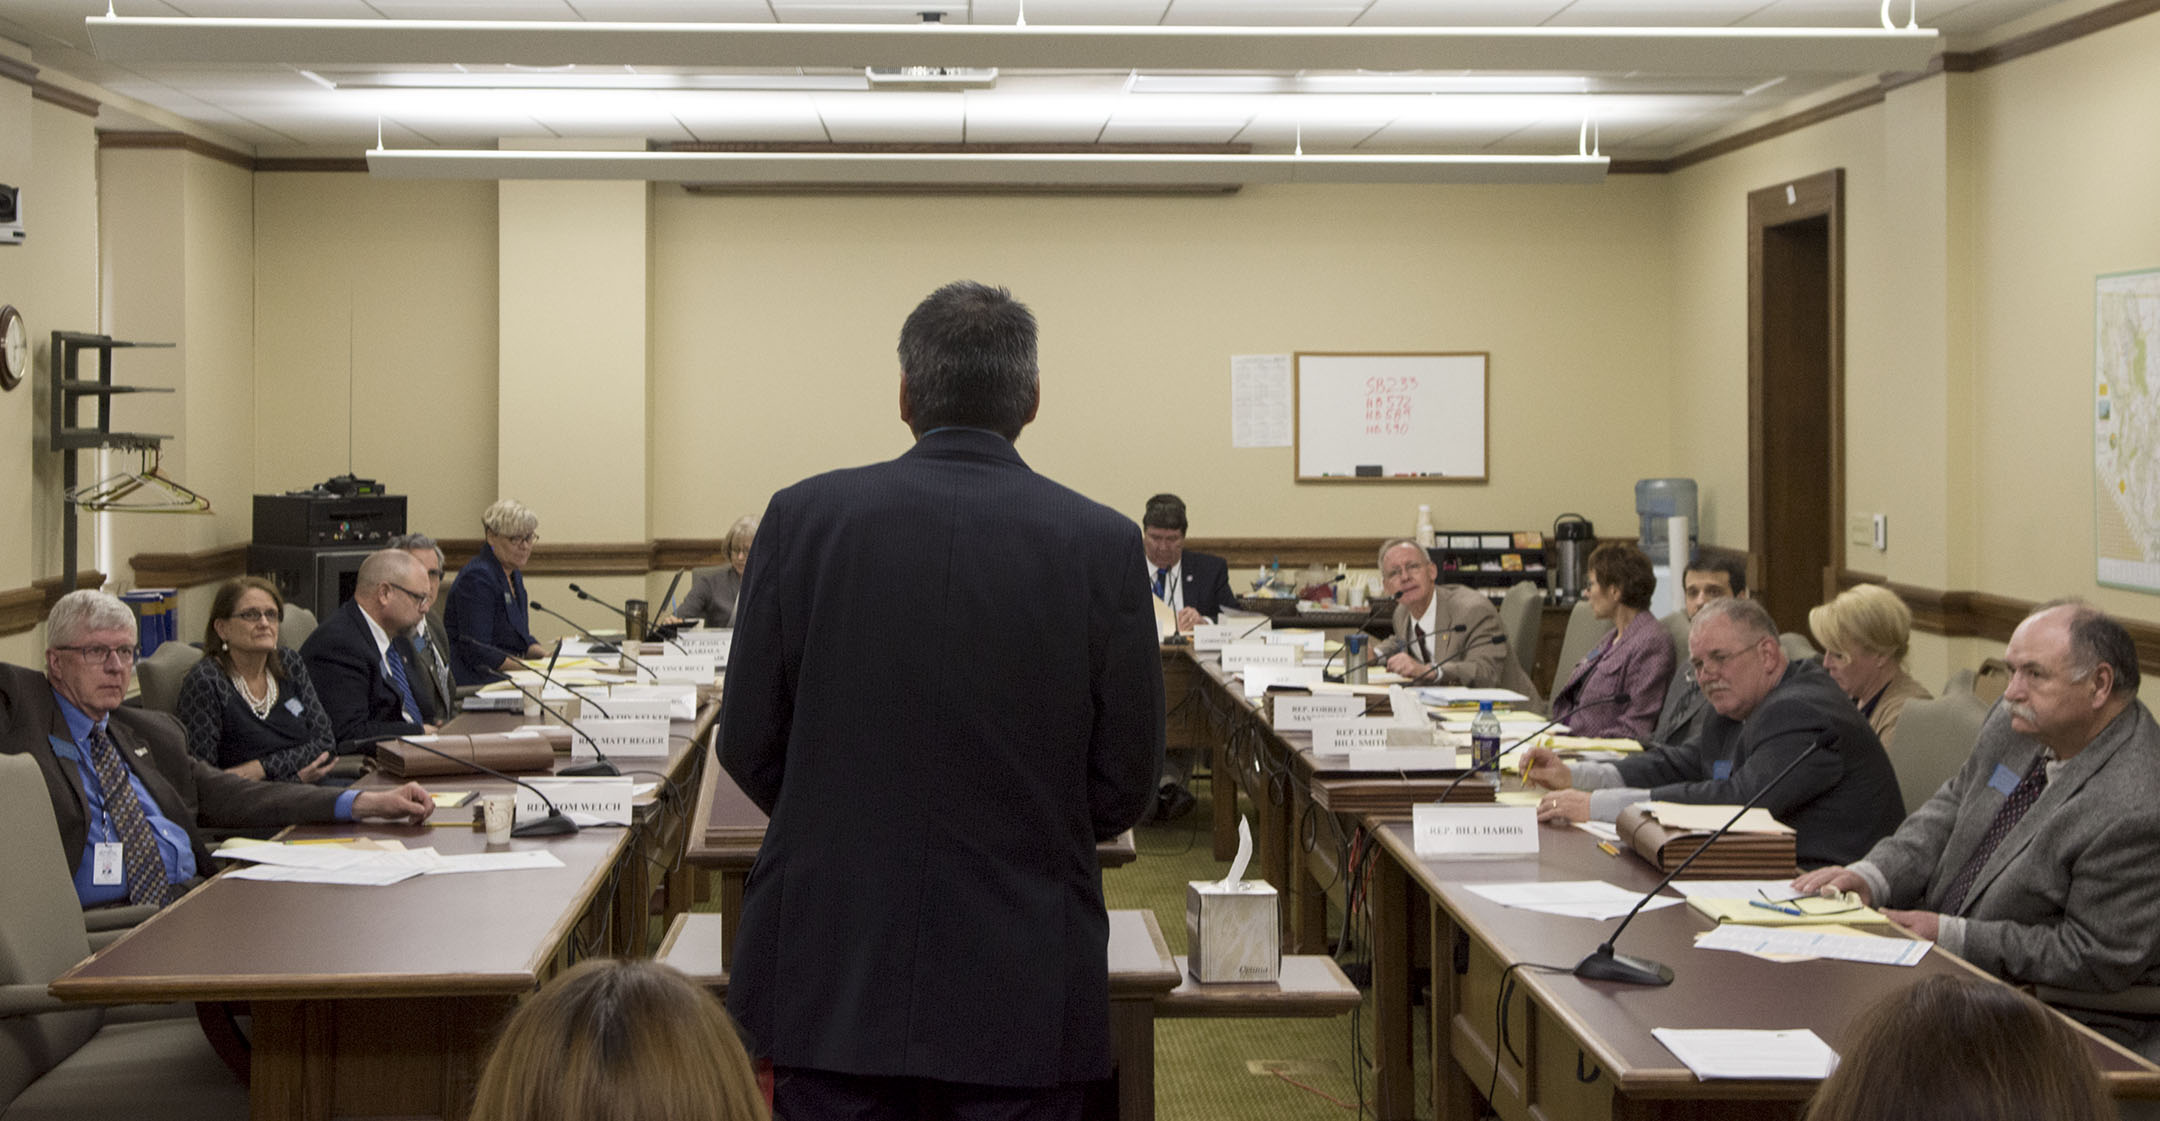 Loren BirdRattler testifies during a hearing on youth suicide in Montana’s House Committee on Human Services.